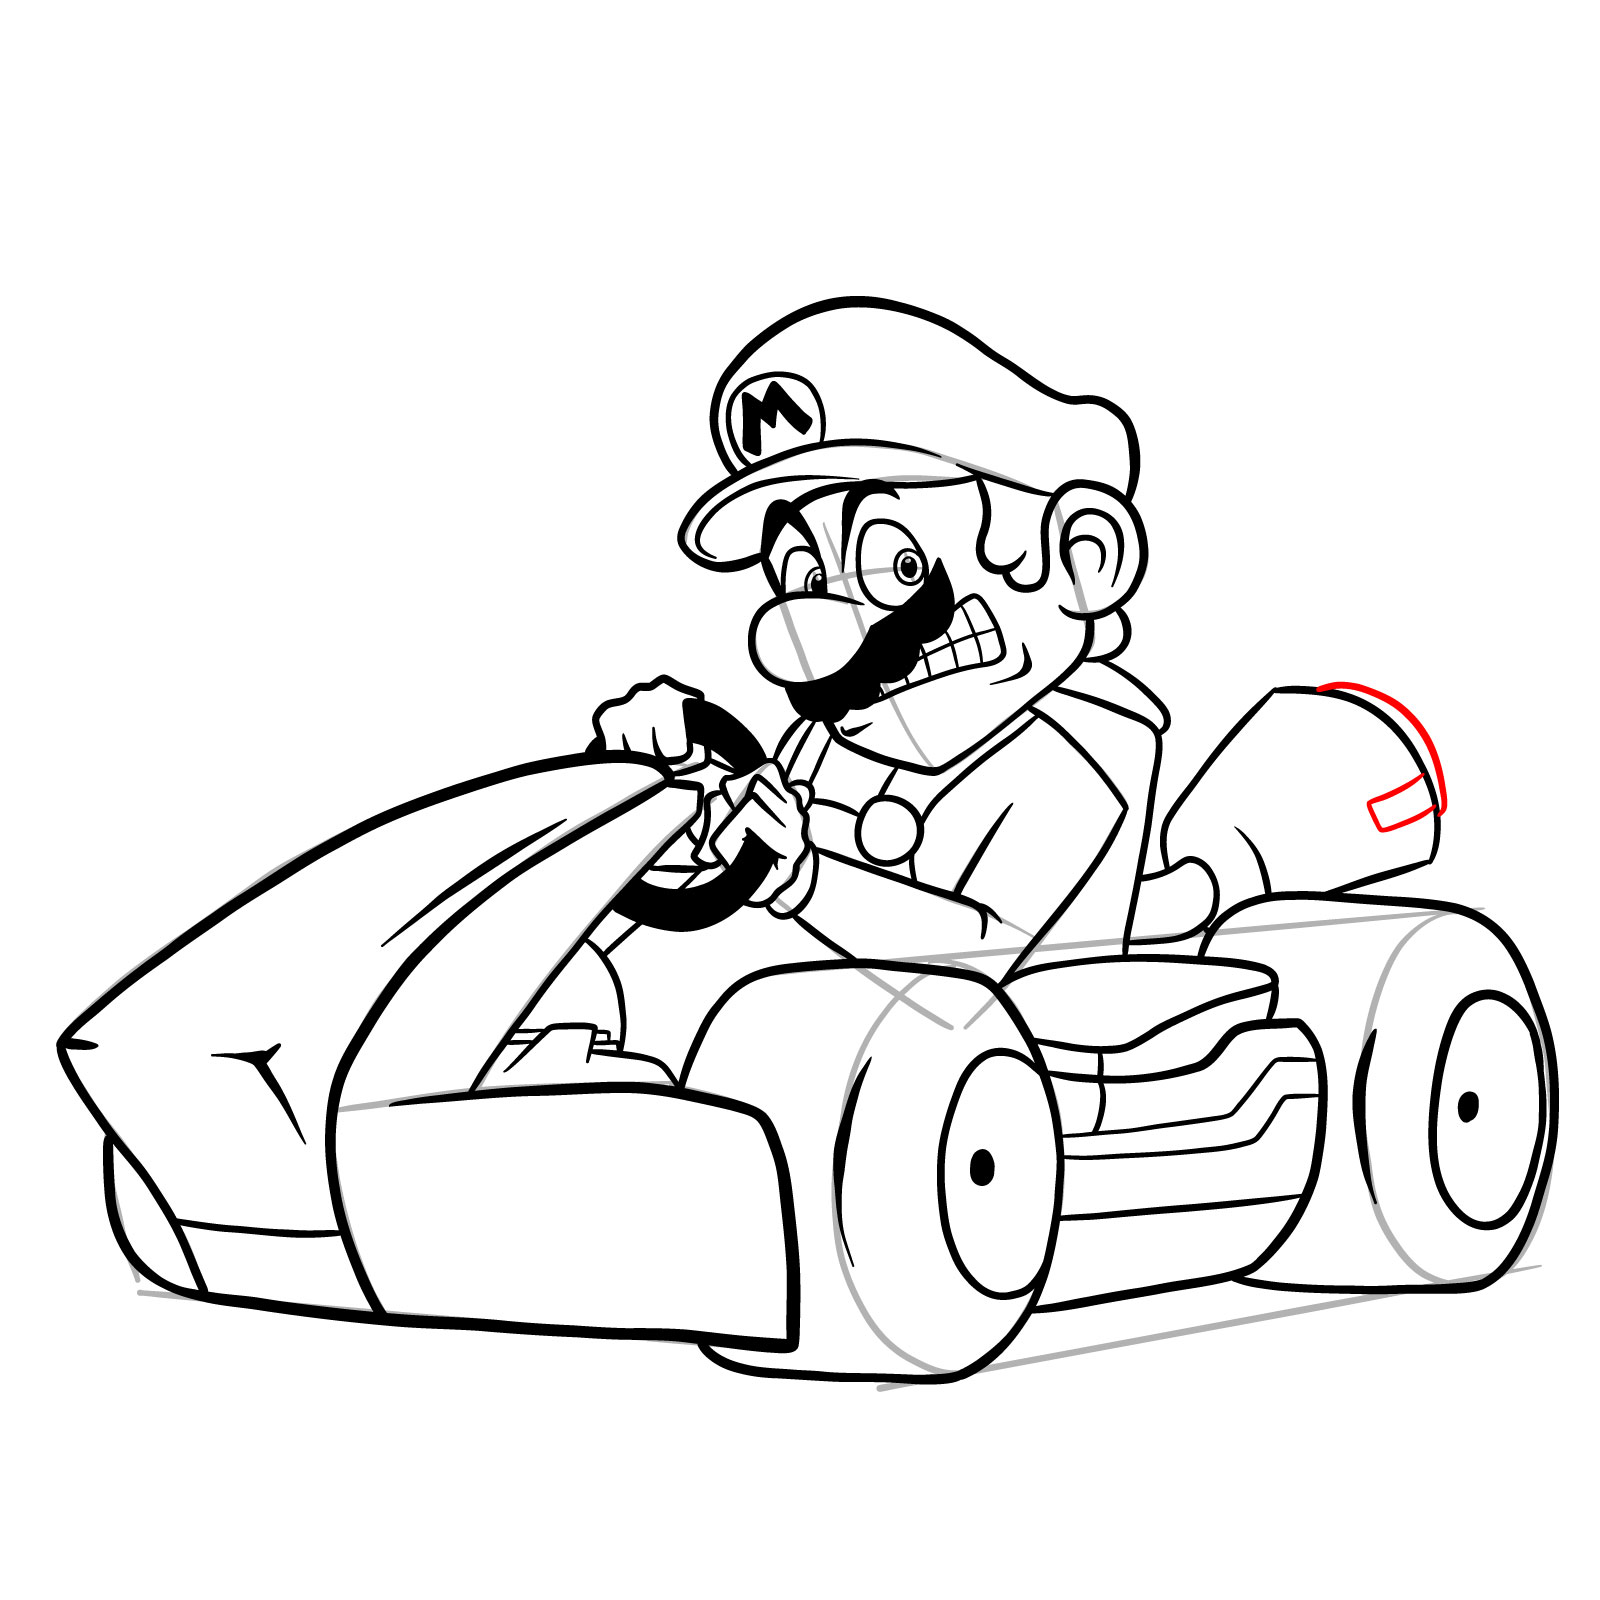 How to draw Race Traitors Mario - step 44